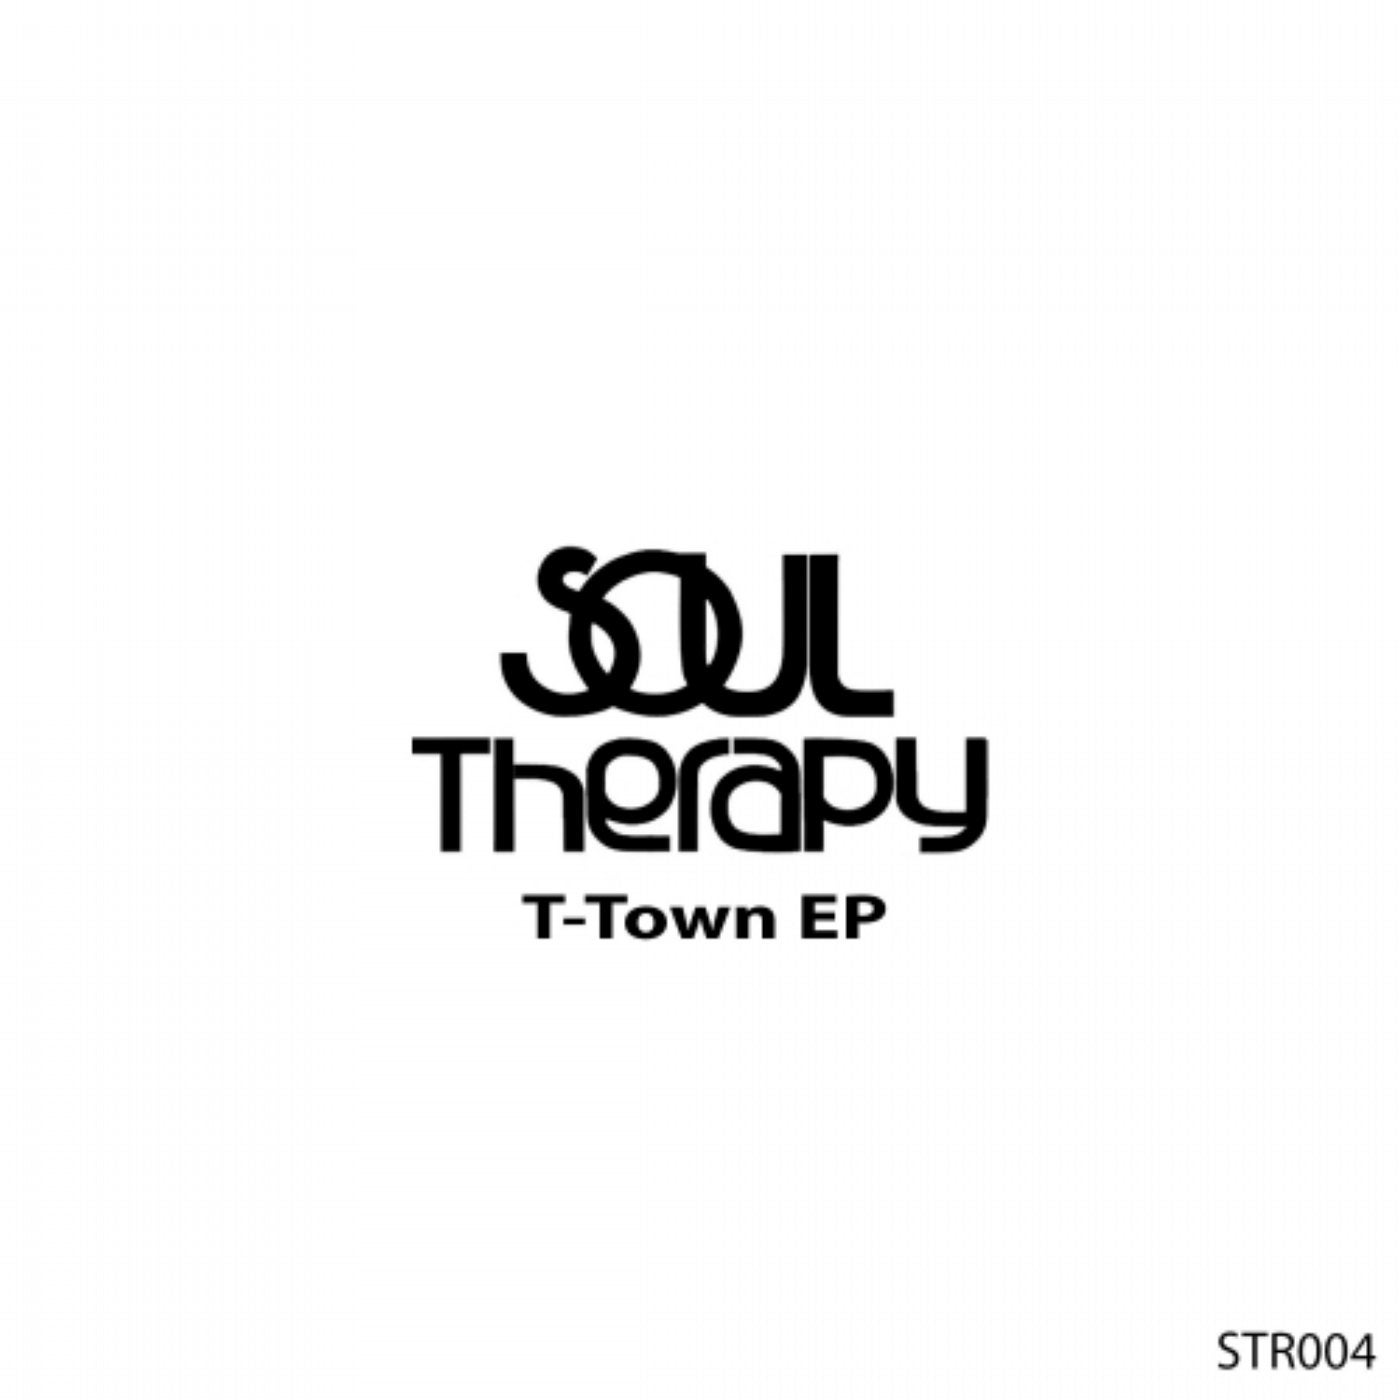 T-Town EP